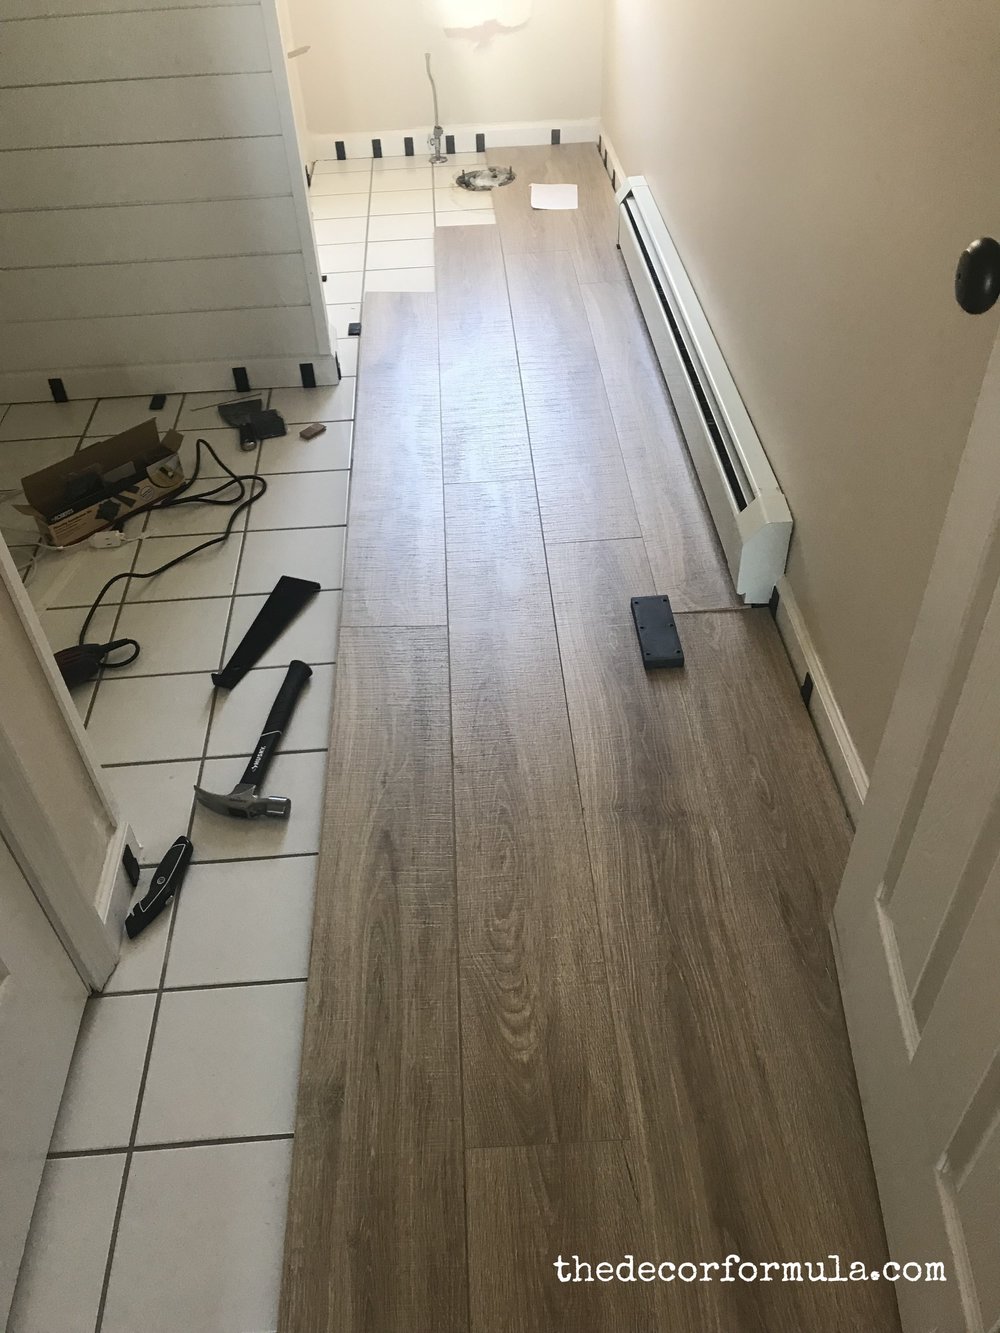 Ideas For Covering Up Tile Floors, Can I Lay Laminate Flooring Over Tile